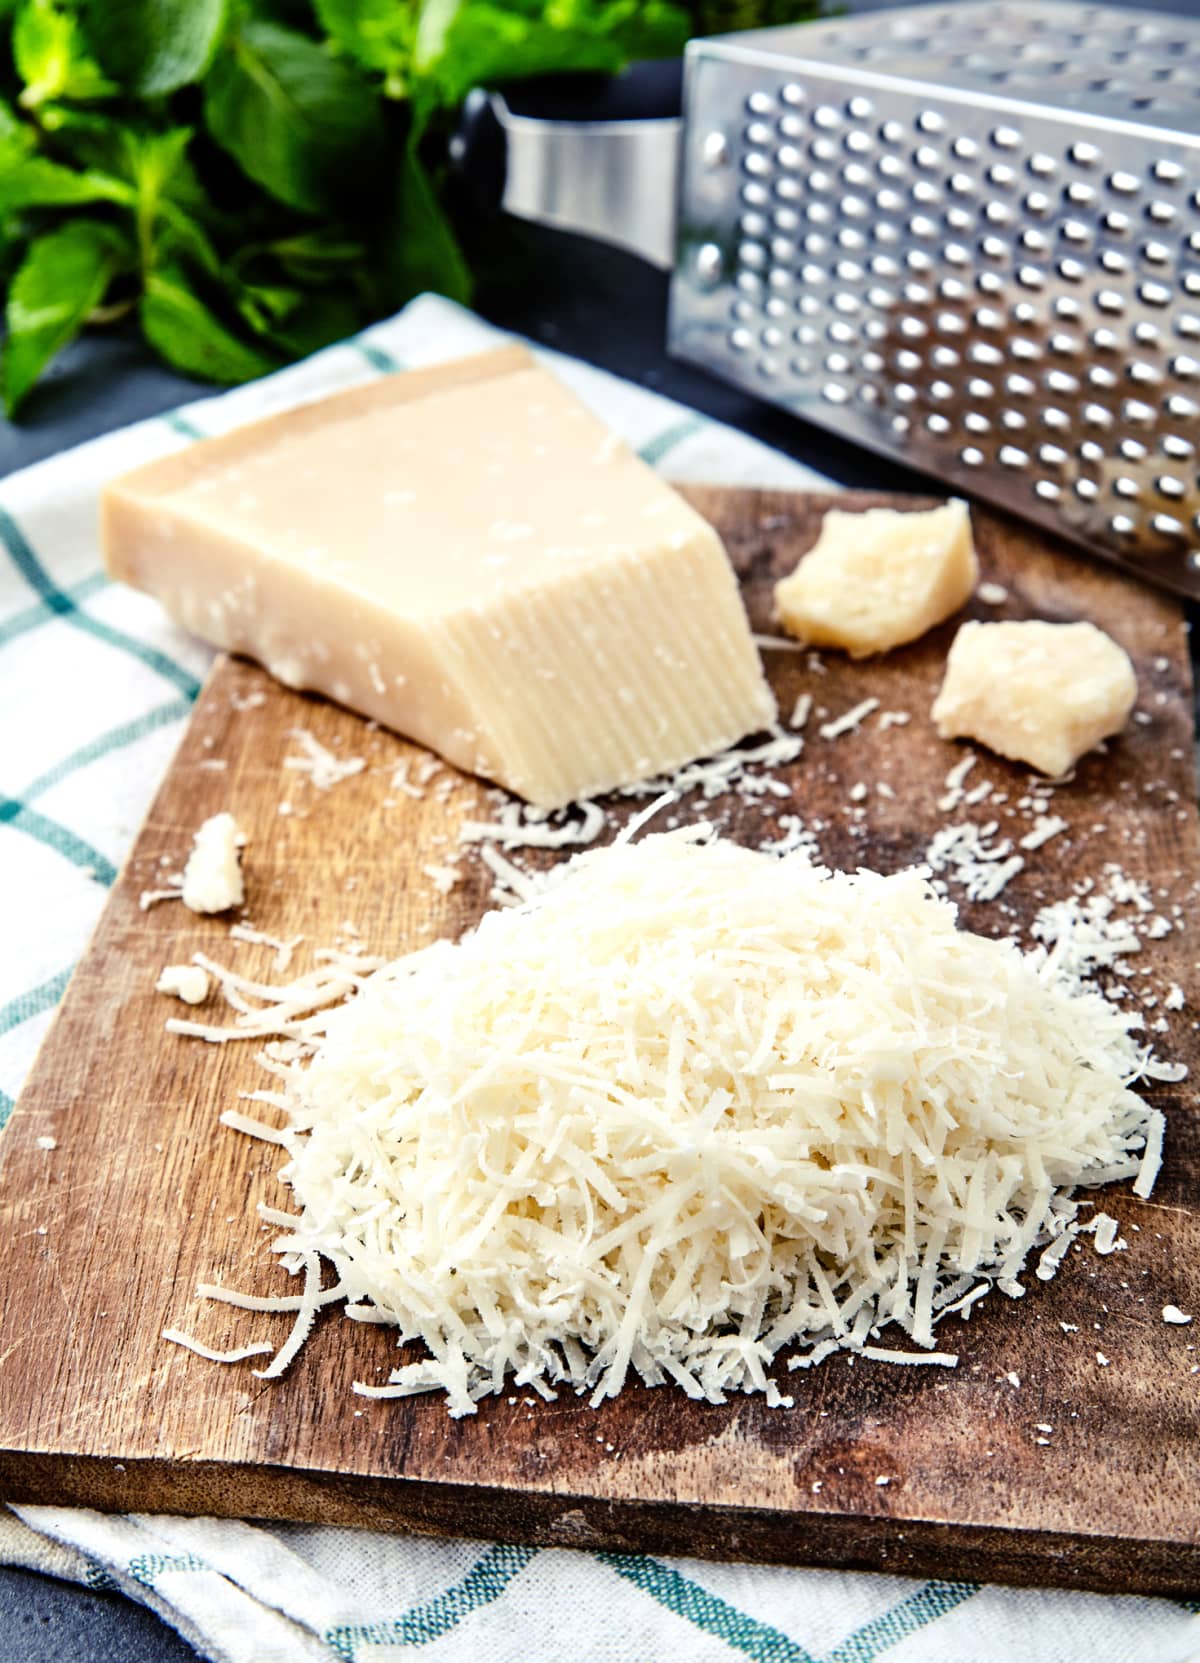 Piece and grated parmigiano reggiano or parmesan cheese on wwood board on checkered napkin . Grated parmesan uses in pasta dishes, soups, risottos and grated over salads.